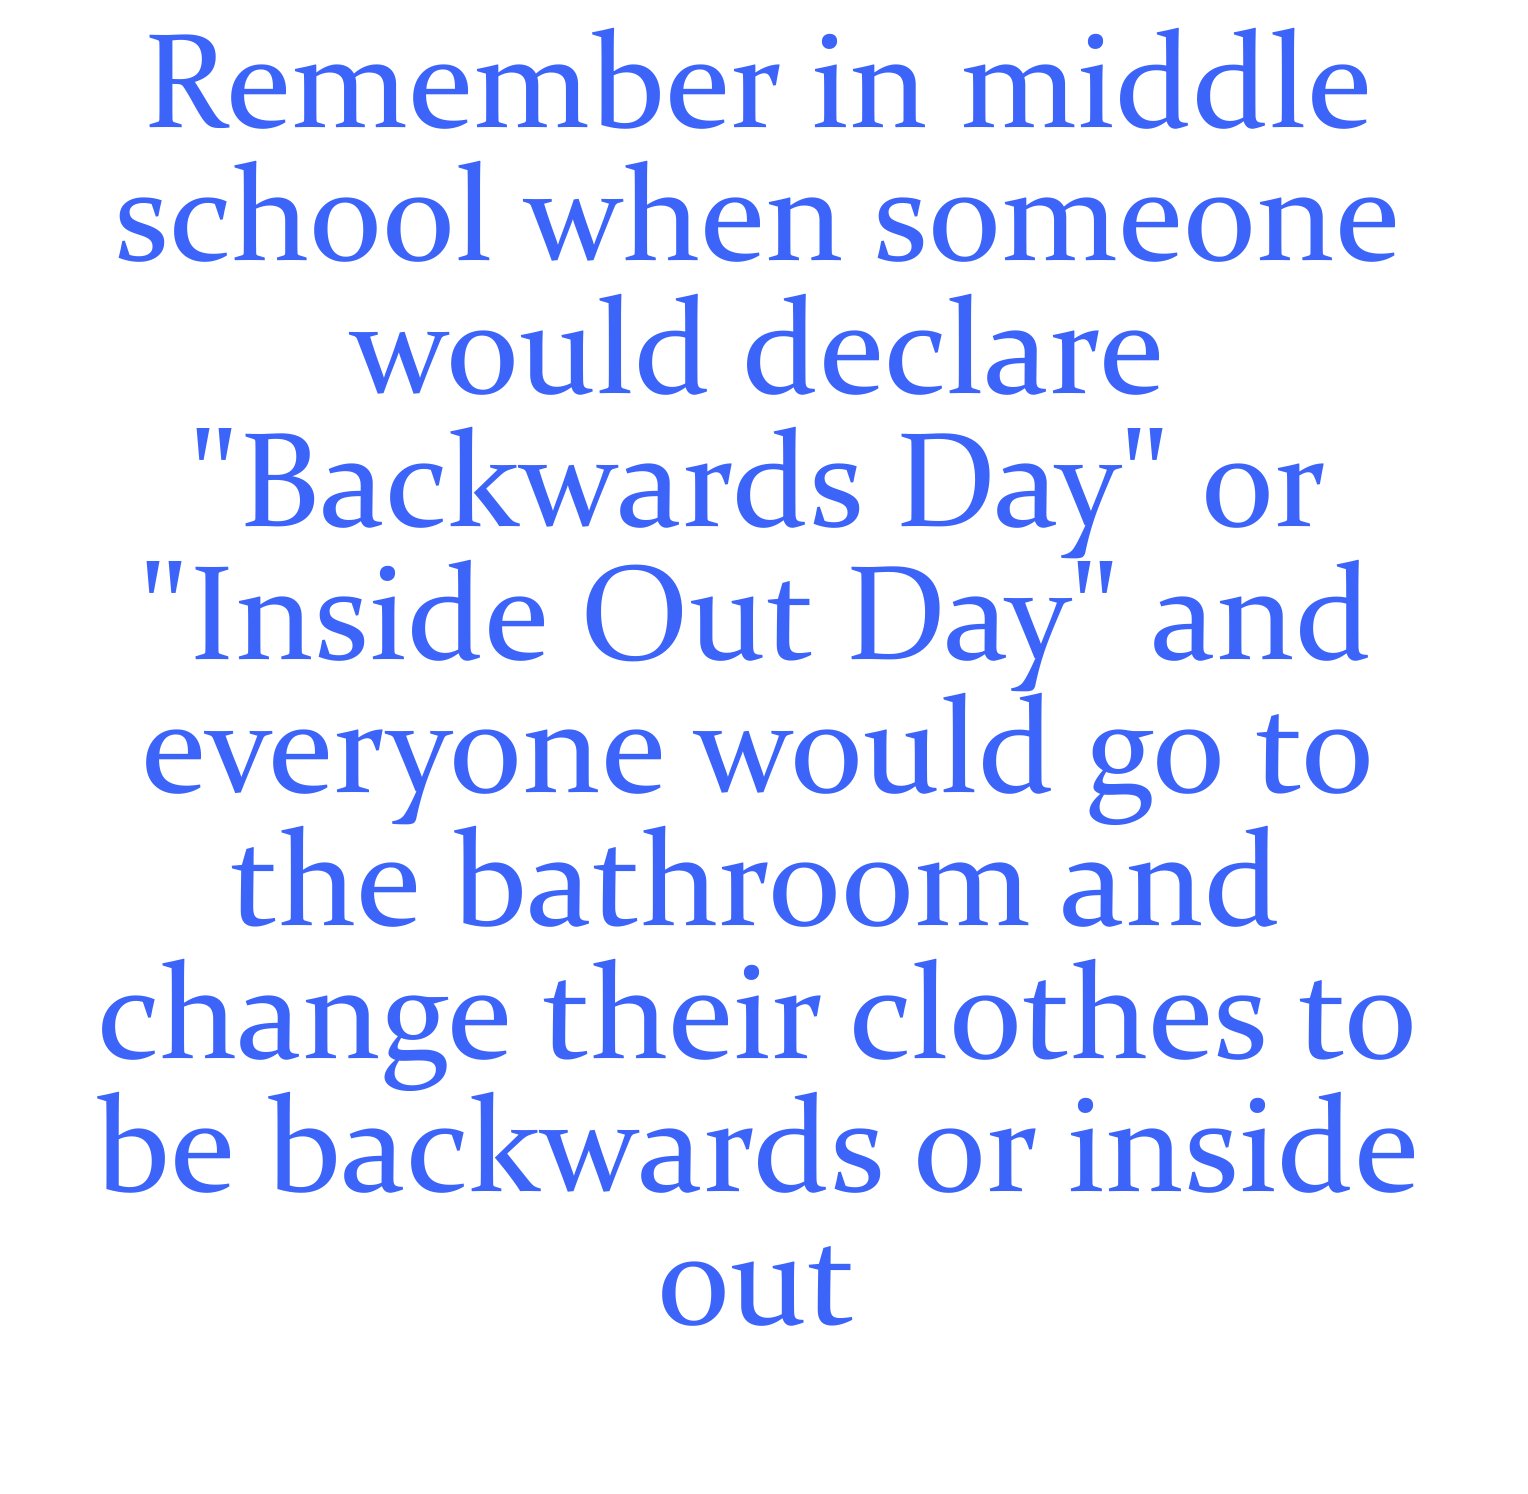 Remember in middle school when someone would declare "Backwards Day" or "Inside Out Day" and everyone would go to the bathroom and change their clothes to be backwards or inside out